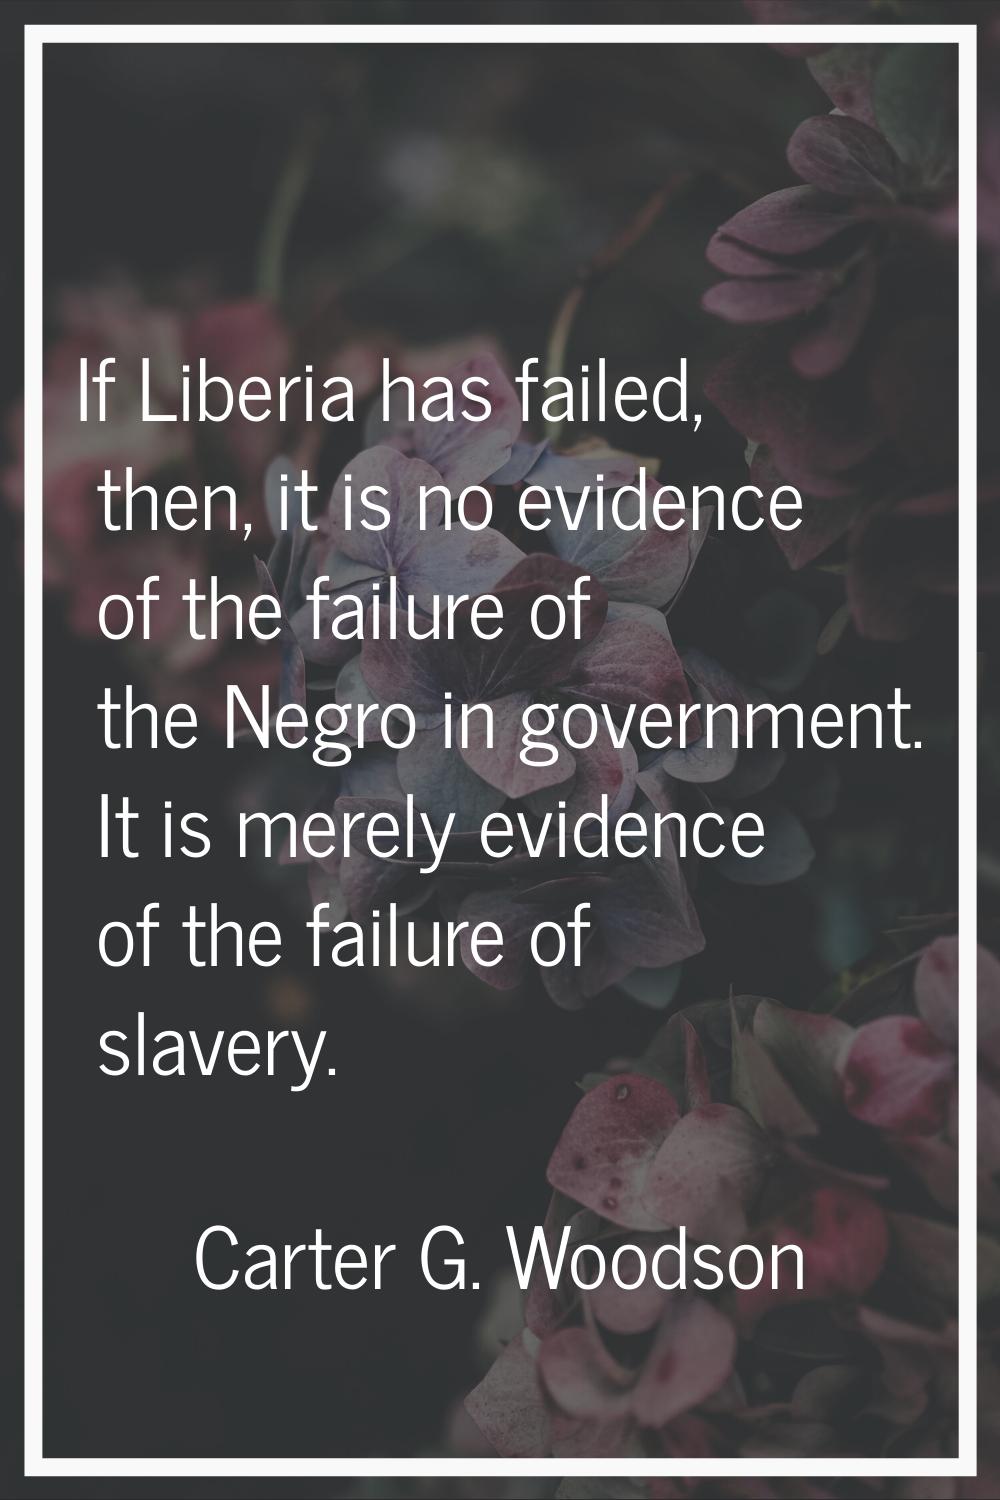 If Liberia has failed, then, it is no evidence of the failure of the Negro in government. It is mer